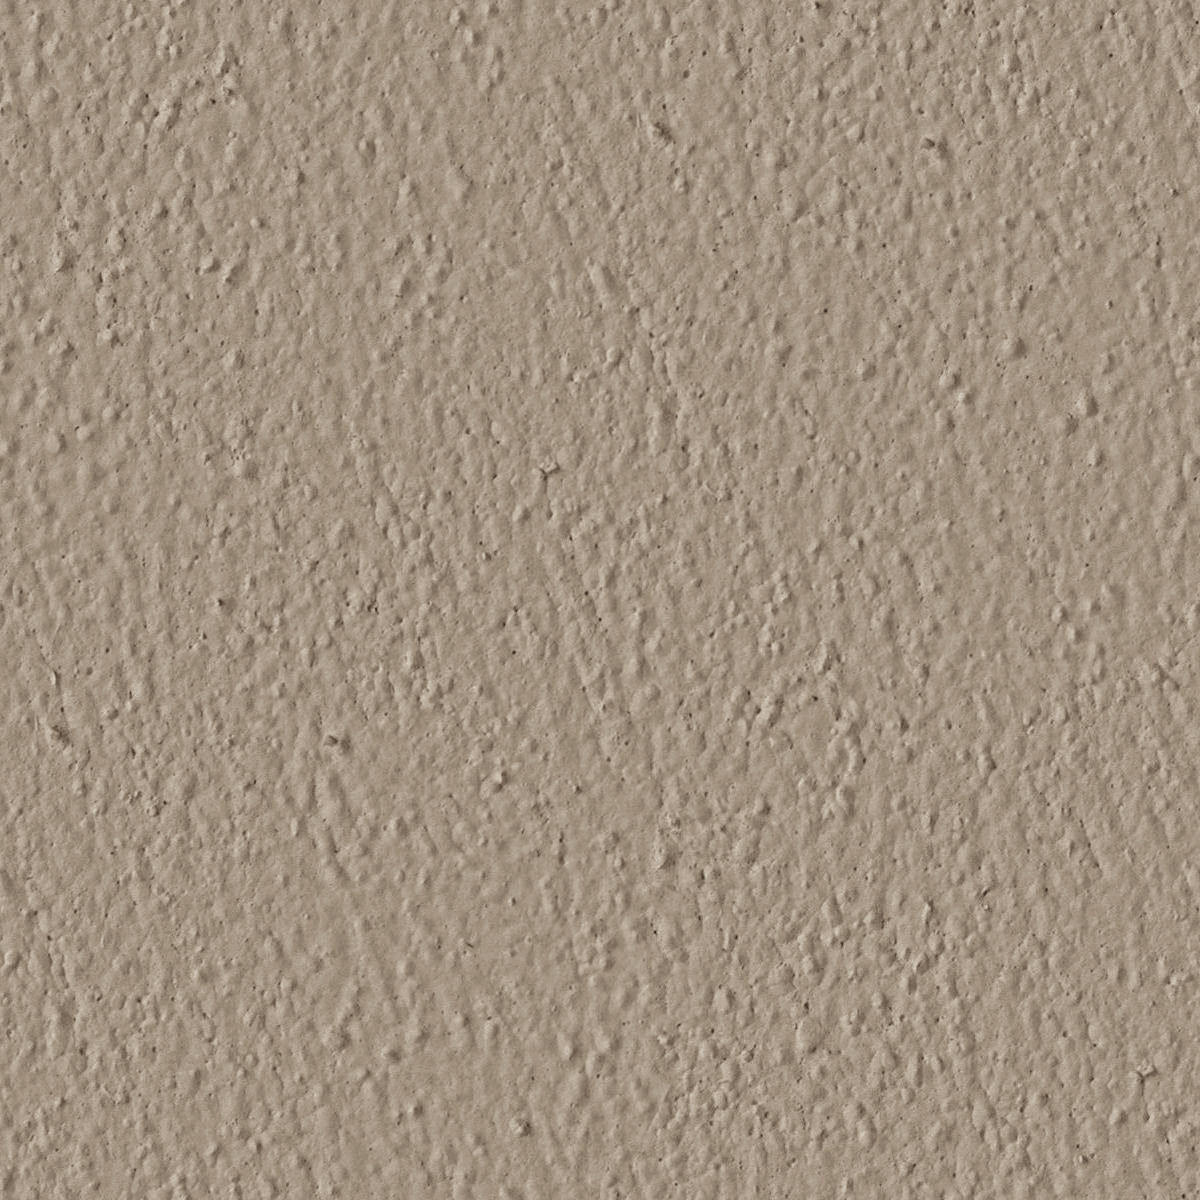  stucco texture download photo background stucco background texture